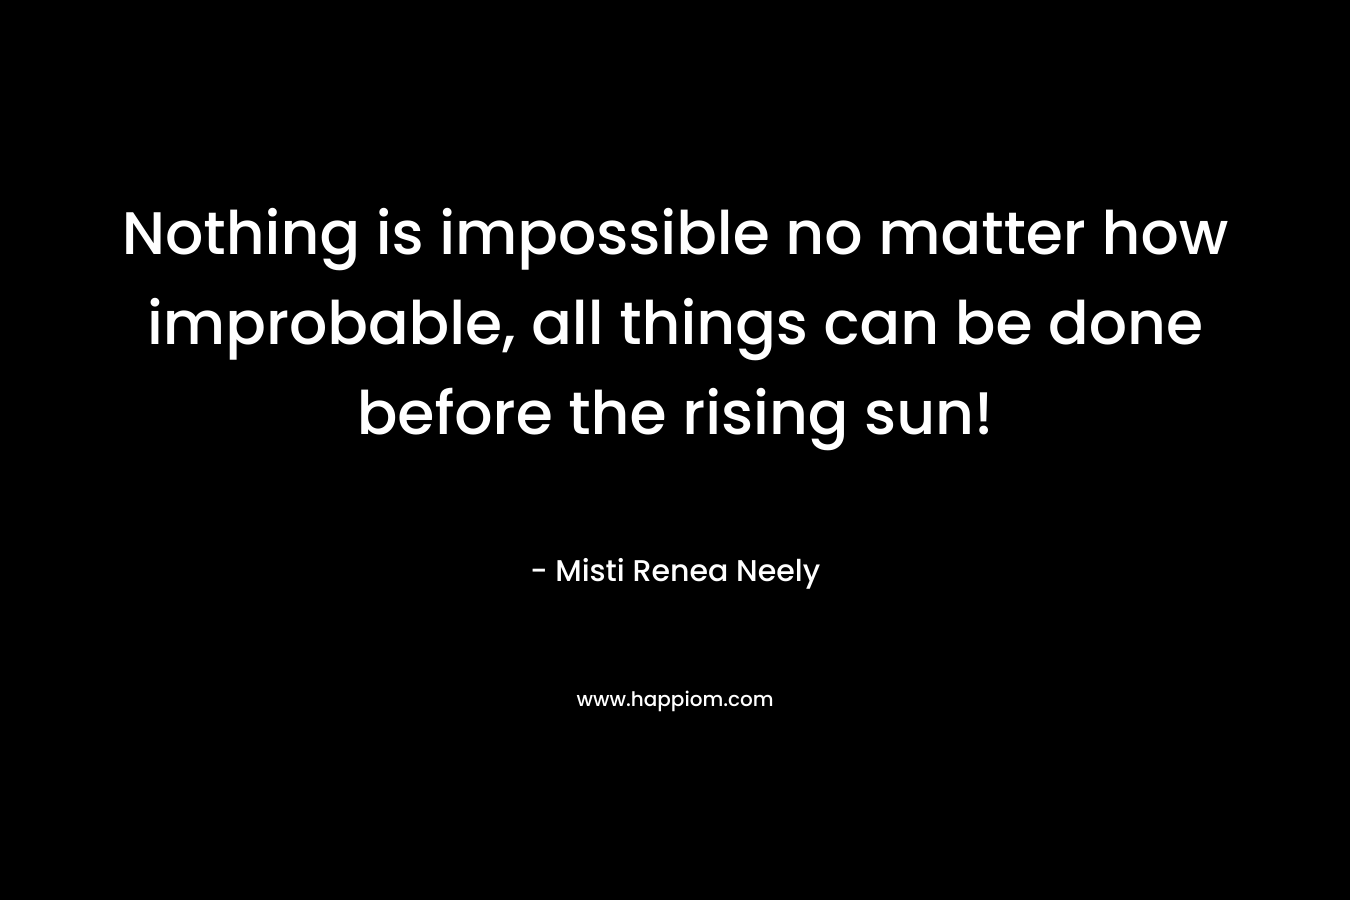 Nothing is impossible no matter how improbable, all things can be done before the rising sun! – Misti Renea Neely